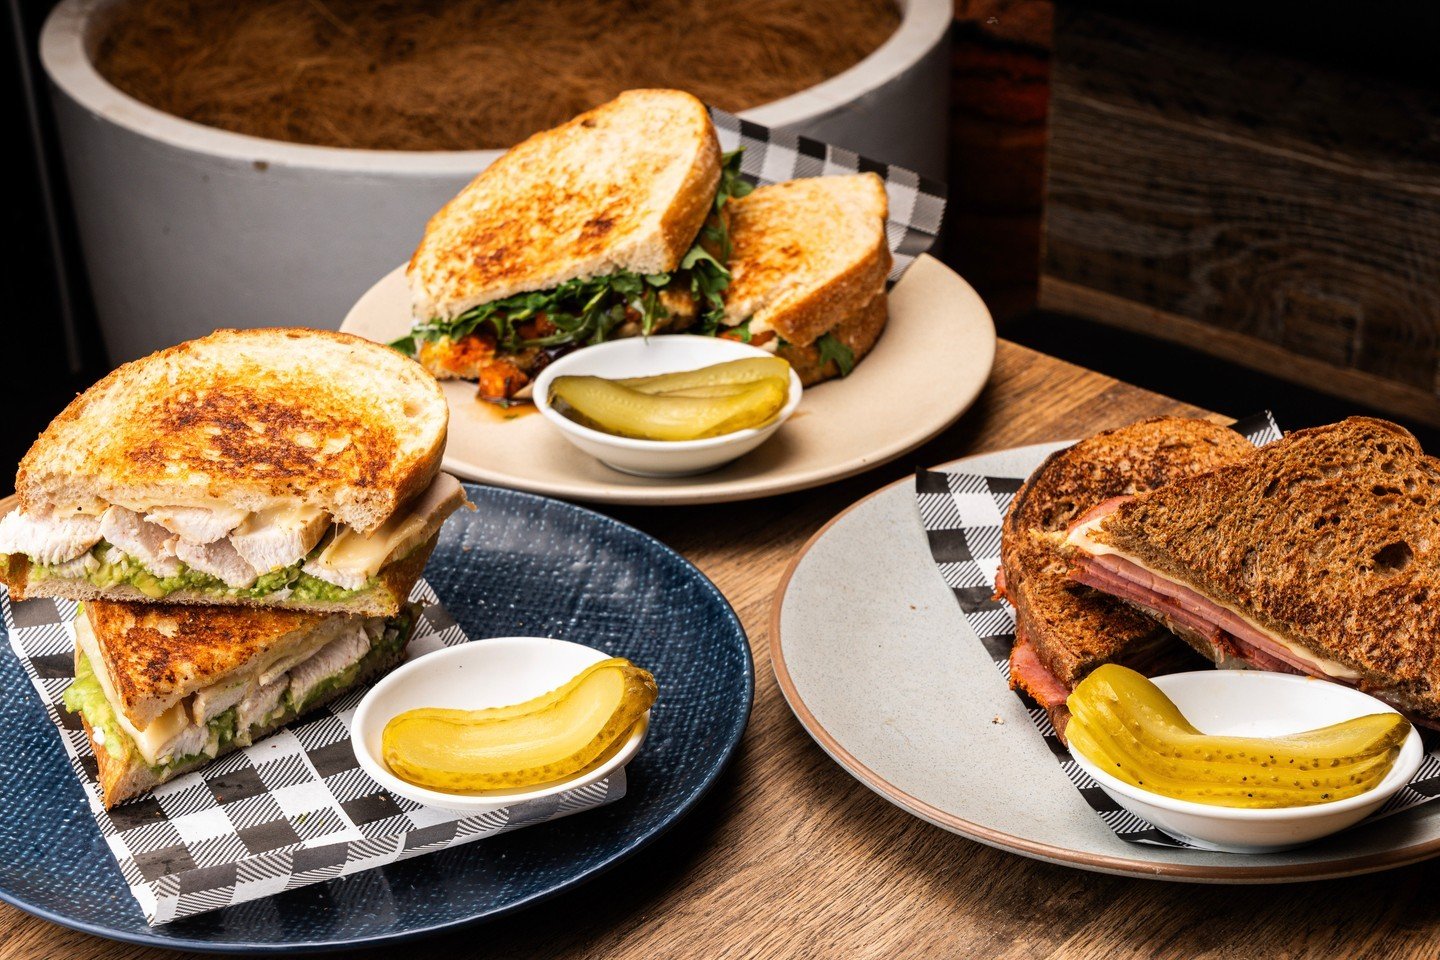 Got your lunch packed but craving something more? Our sandwiches are definitely the answer 🙌

Order online at www.caffeinecartelsydney.com.au or visit us at 32 Martin Place, Sydney!